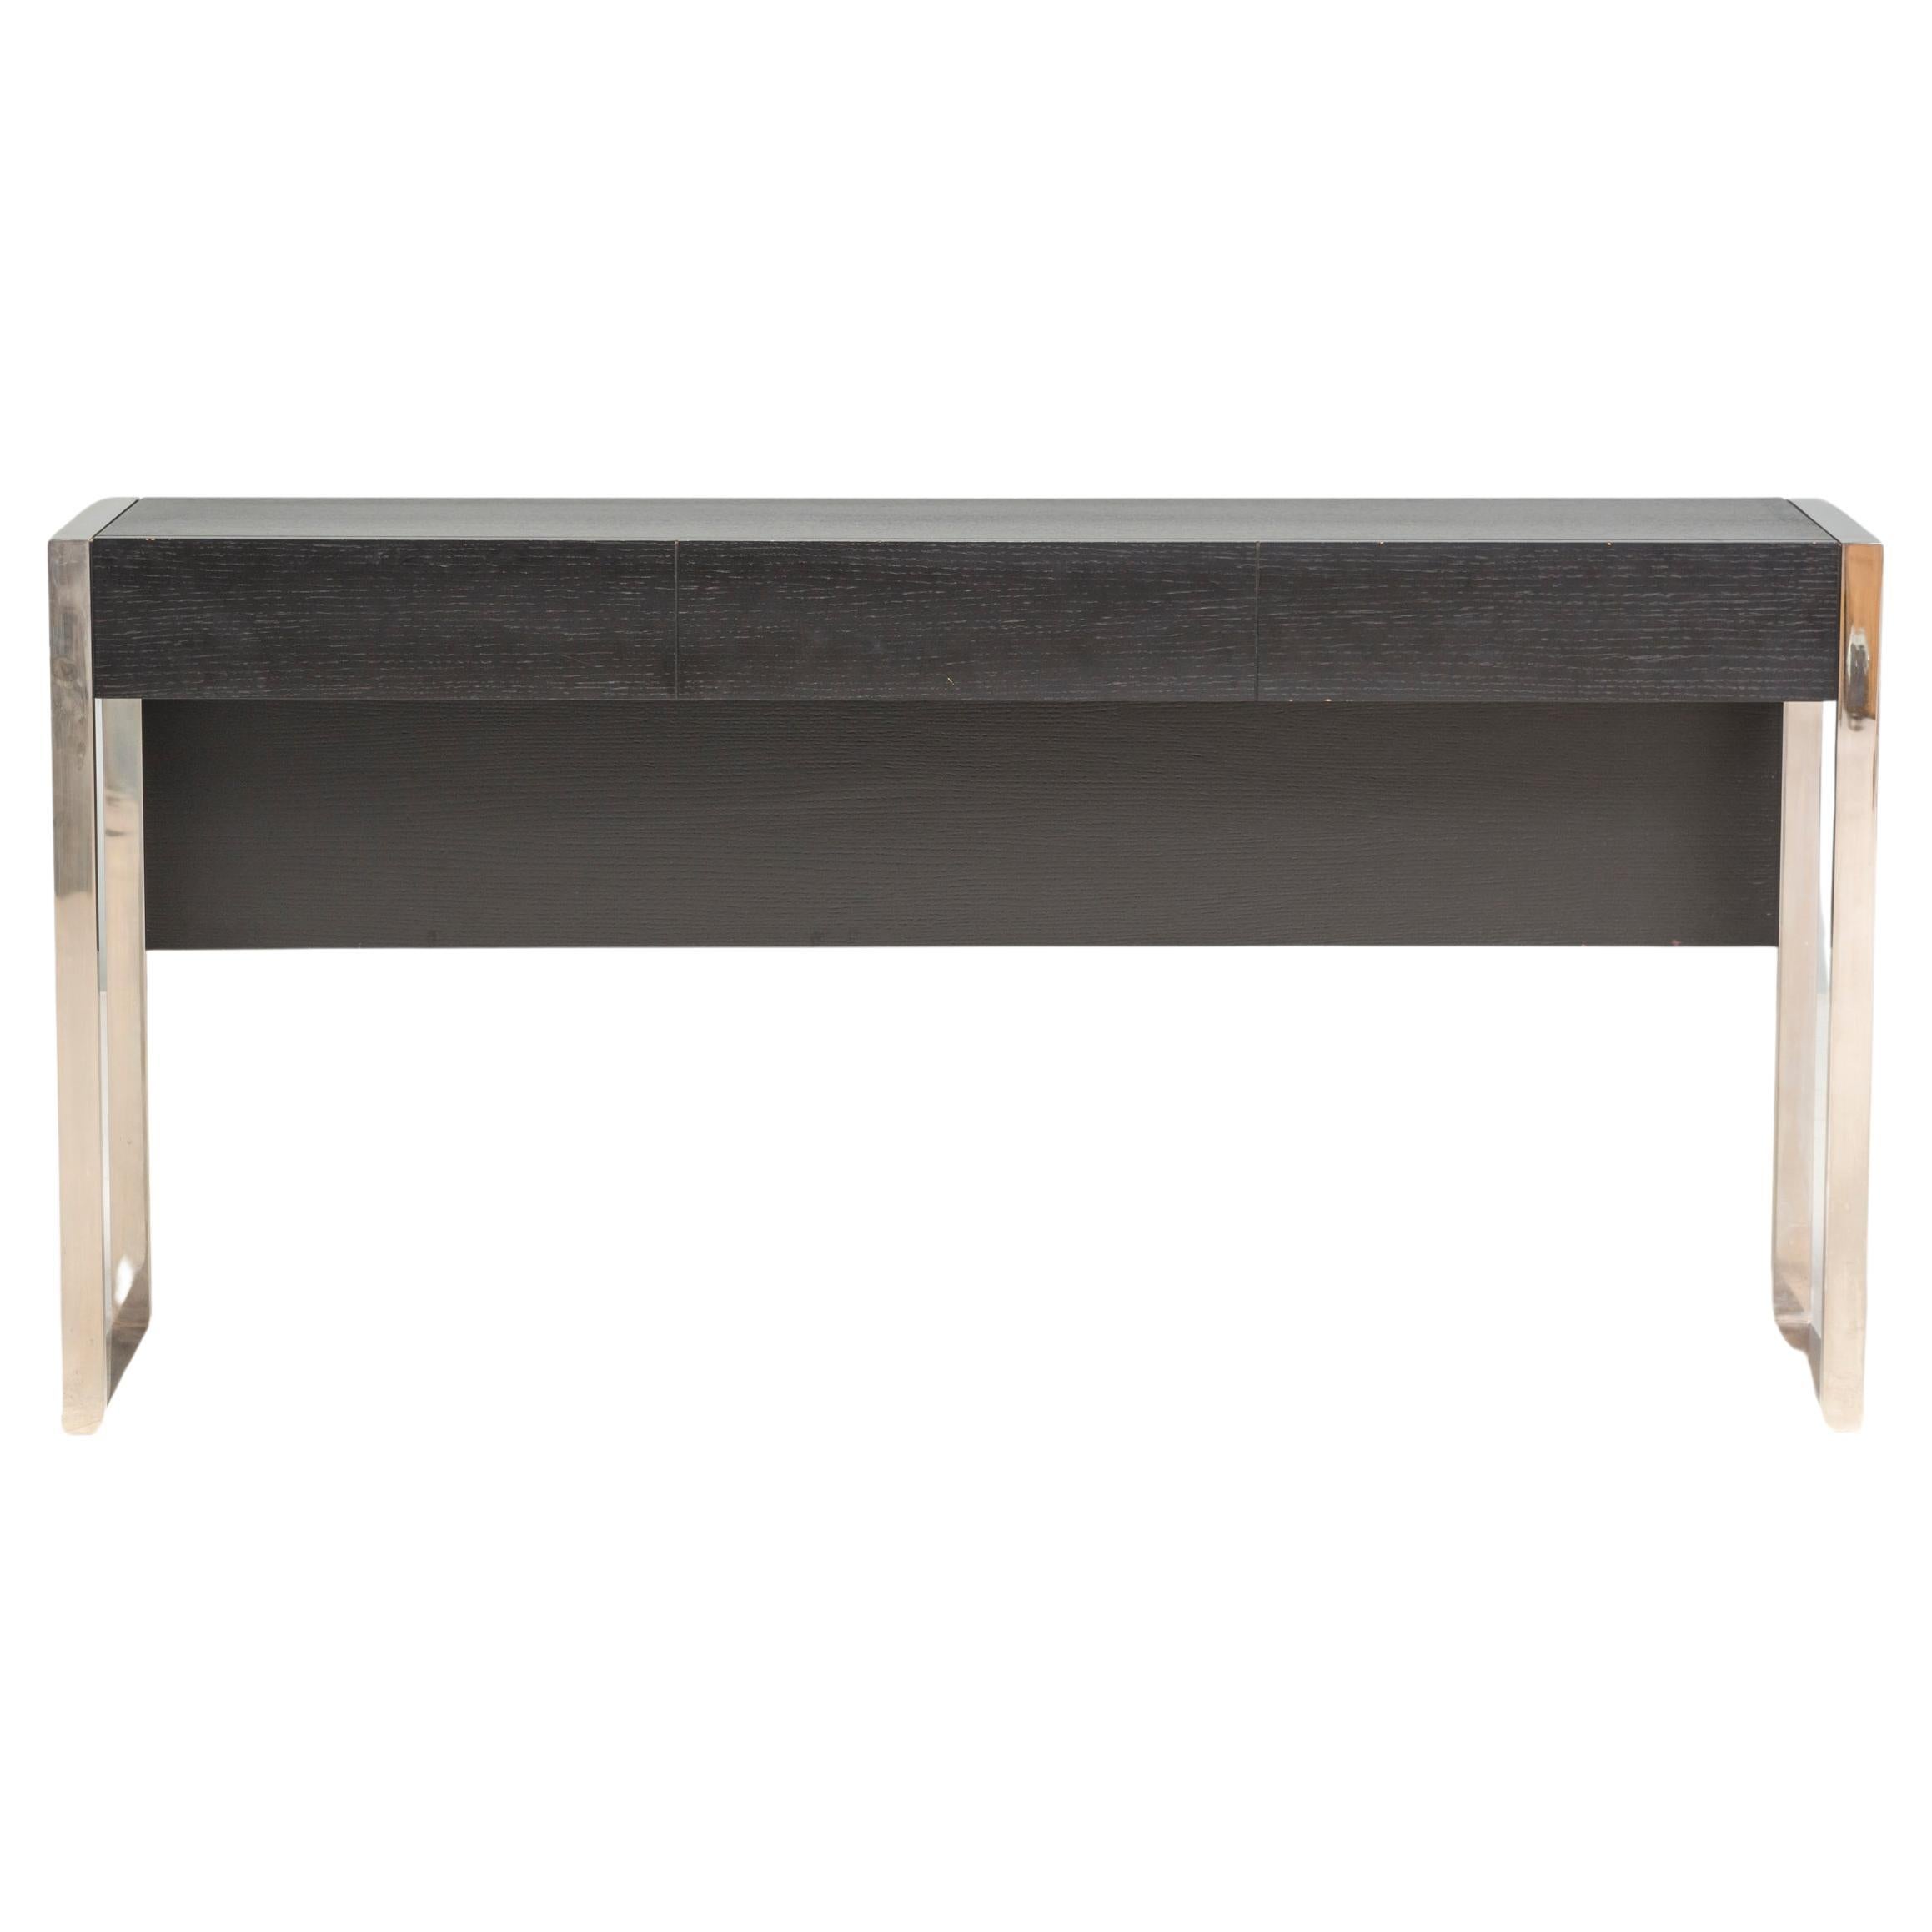 Bespoke Wood And Steel Console Table For Sale